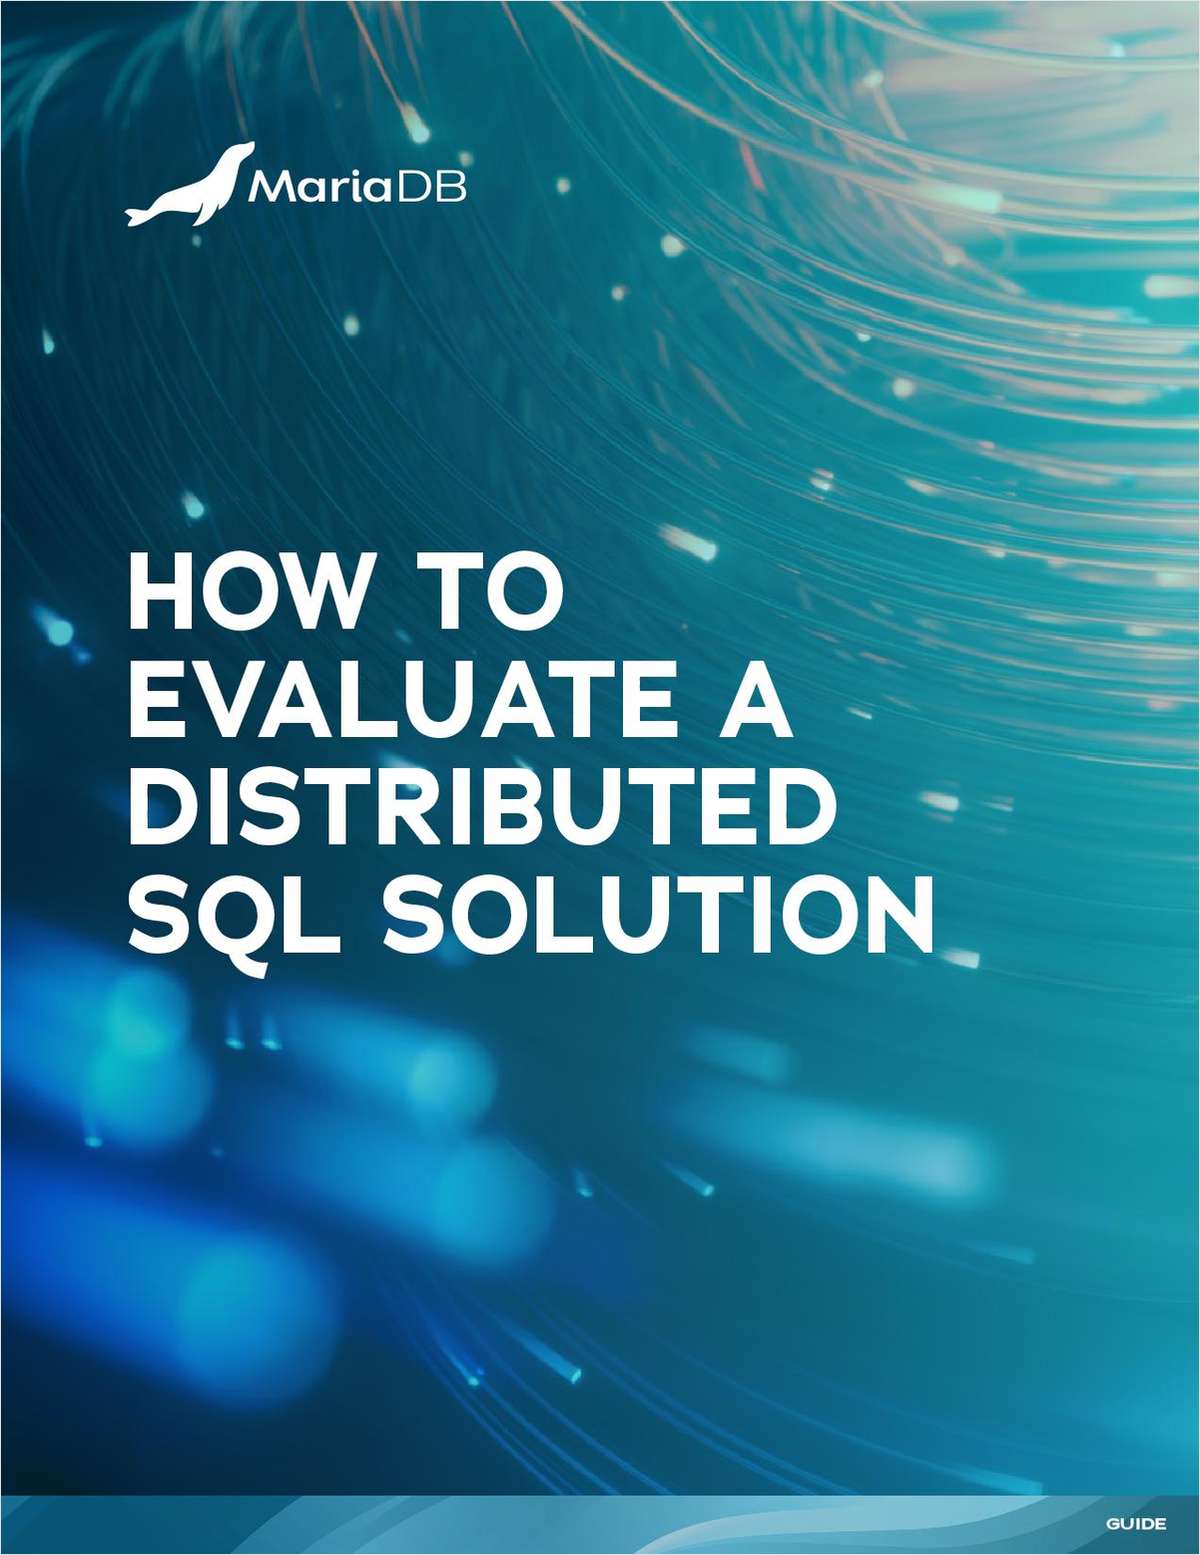 Evaluate a Distributed SQL Solution